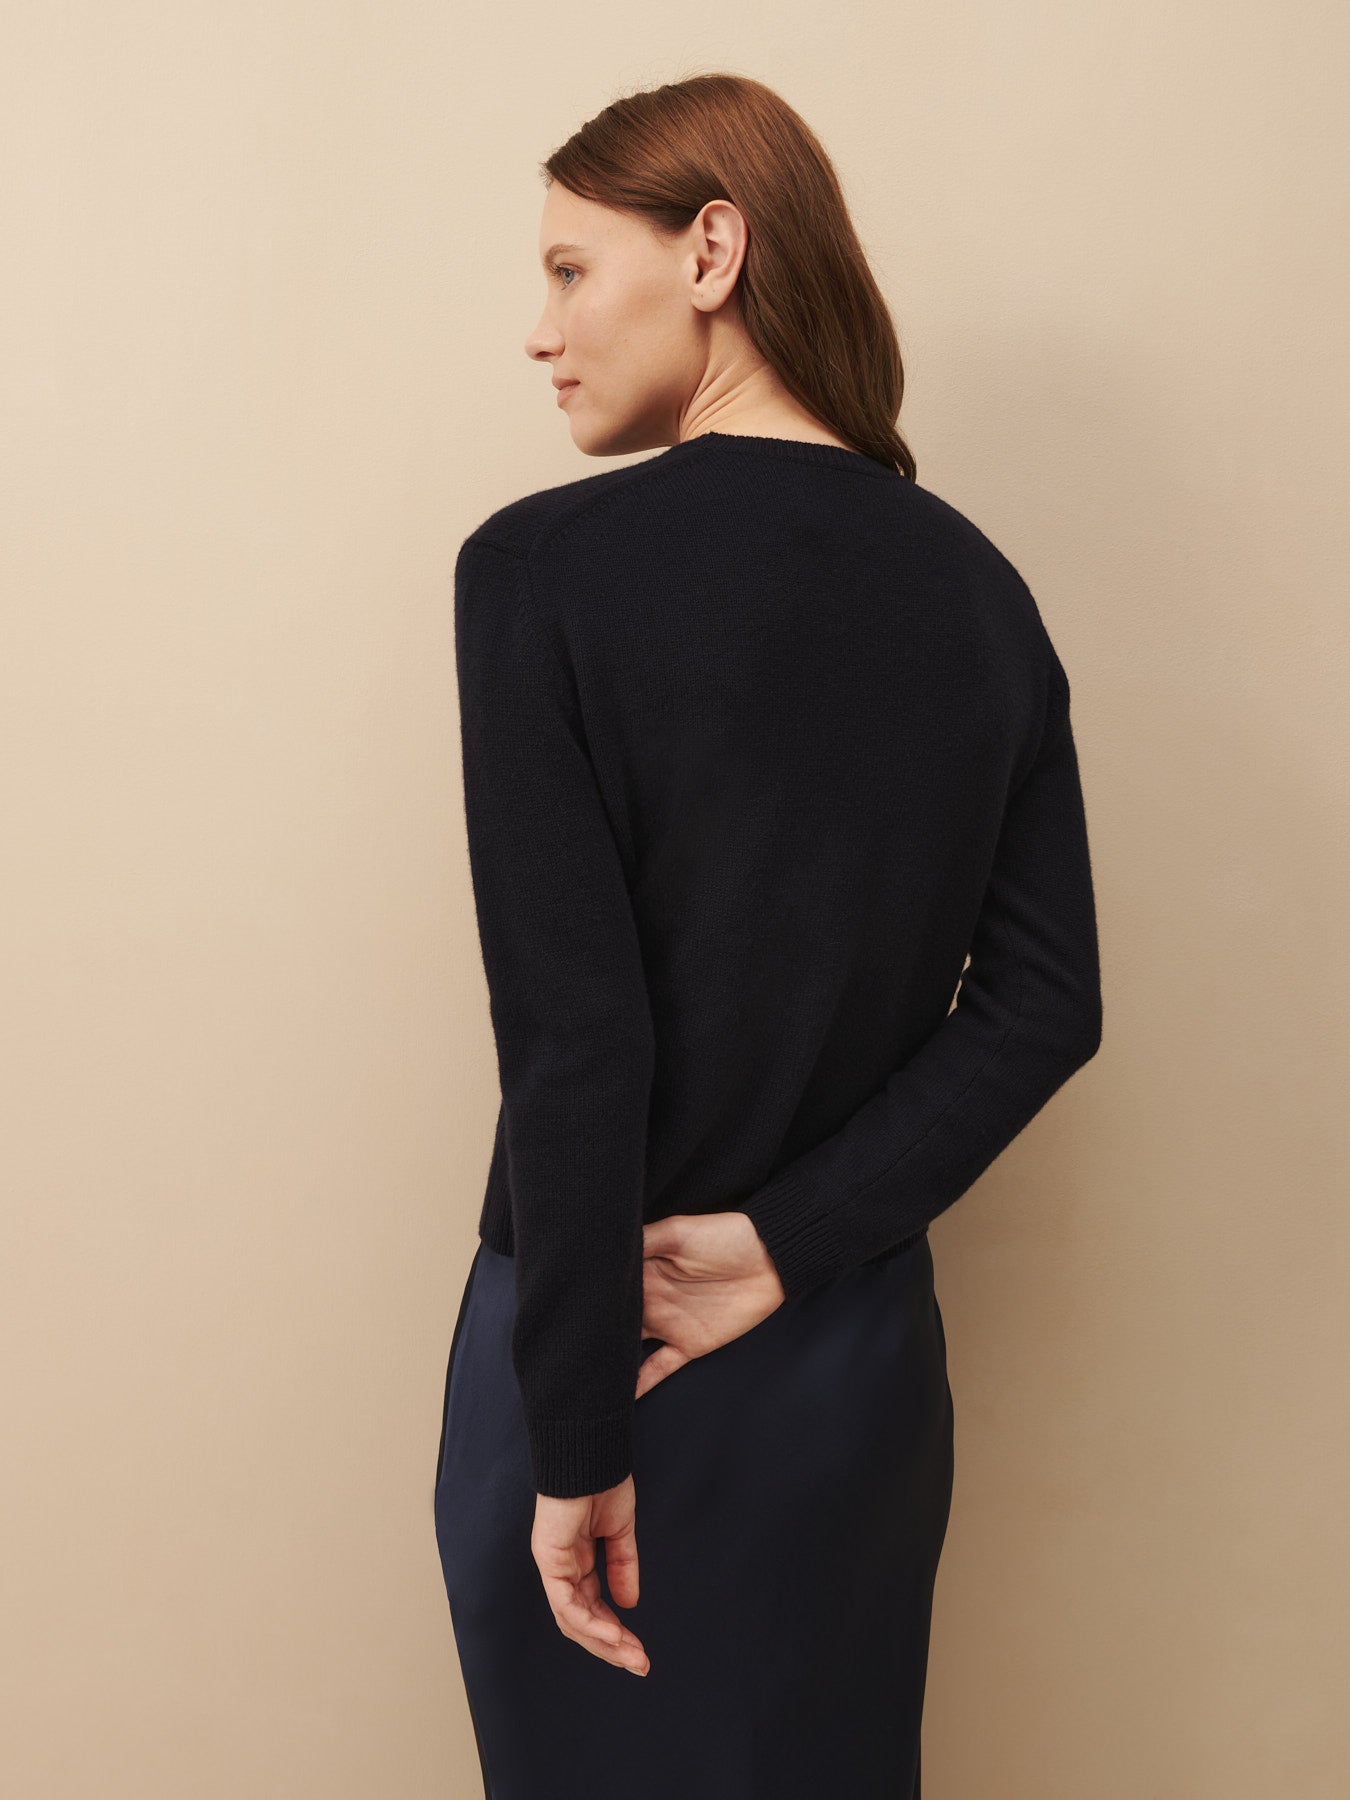 TWP Midnight Jill Crewneck Sweater in cashmere view 2